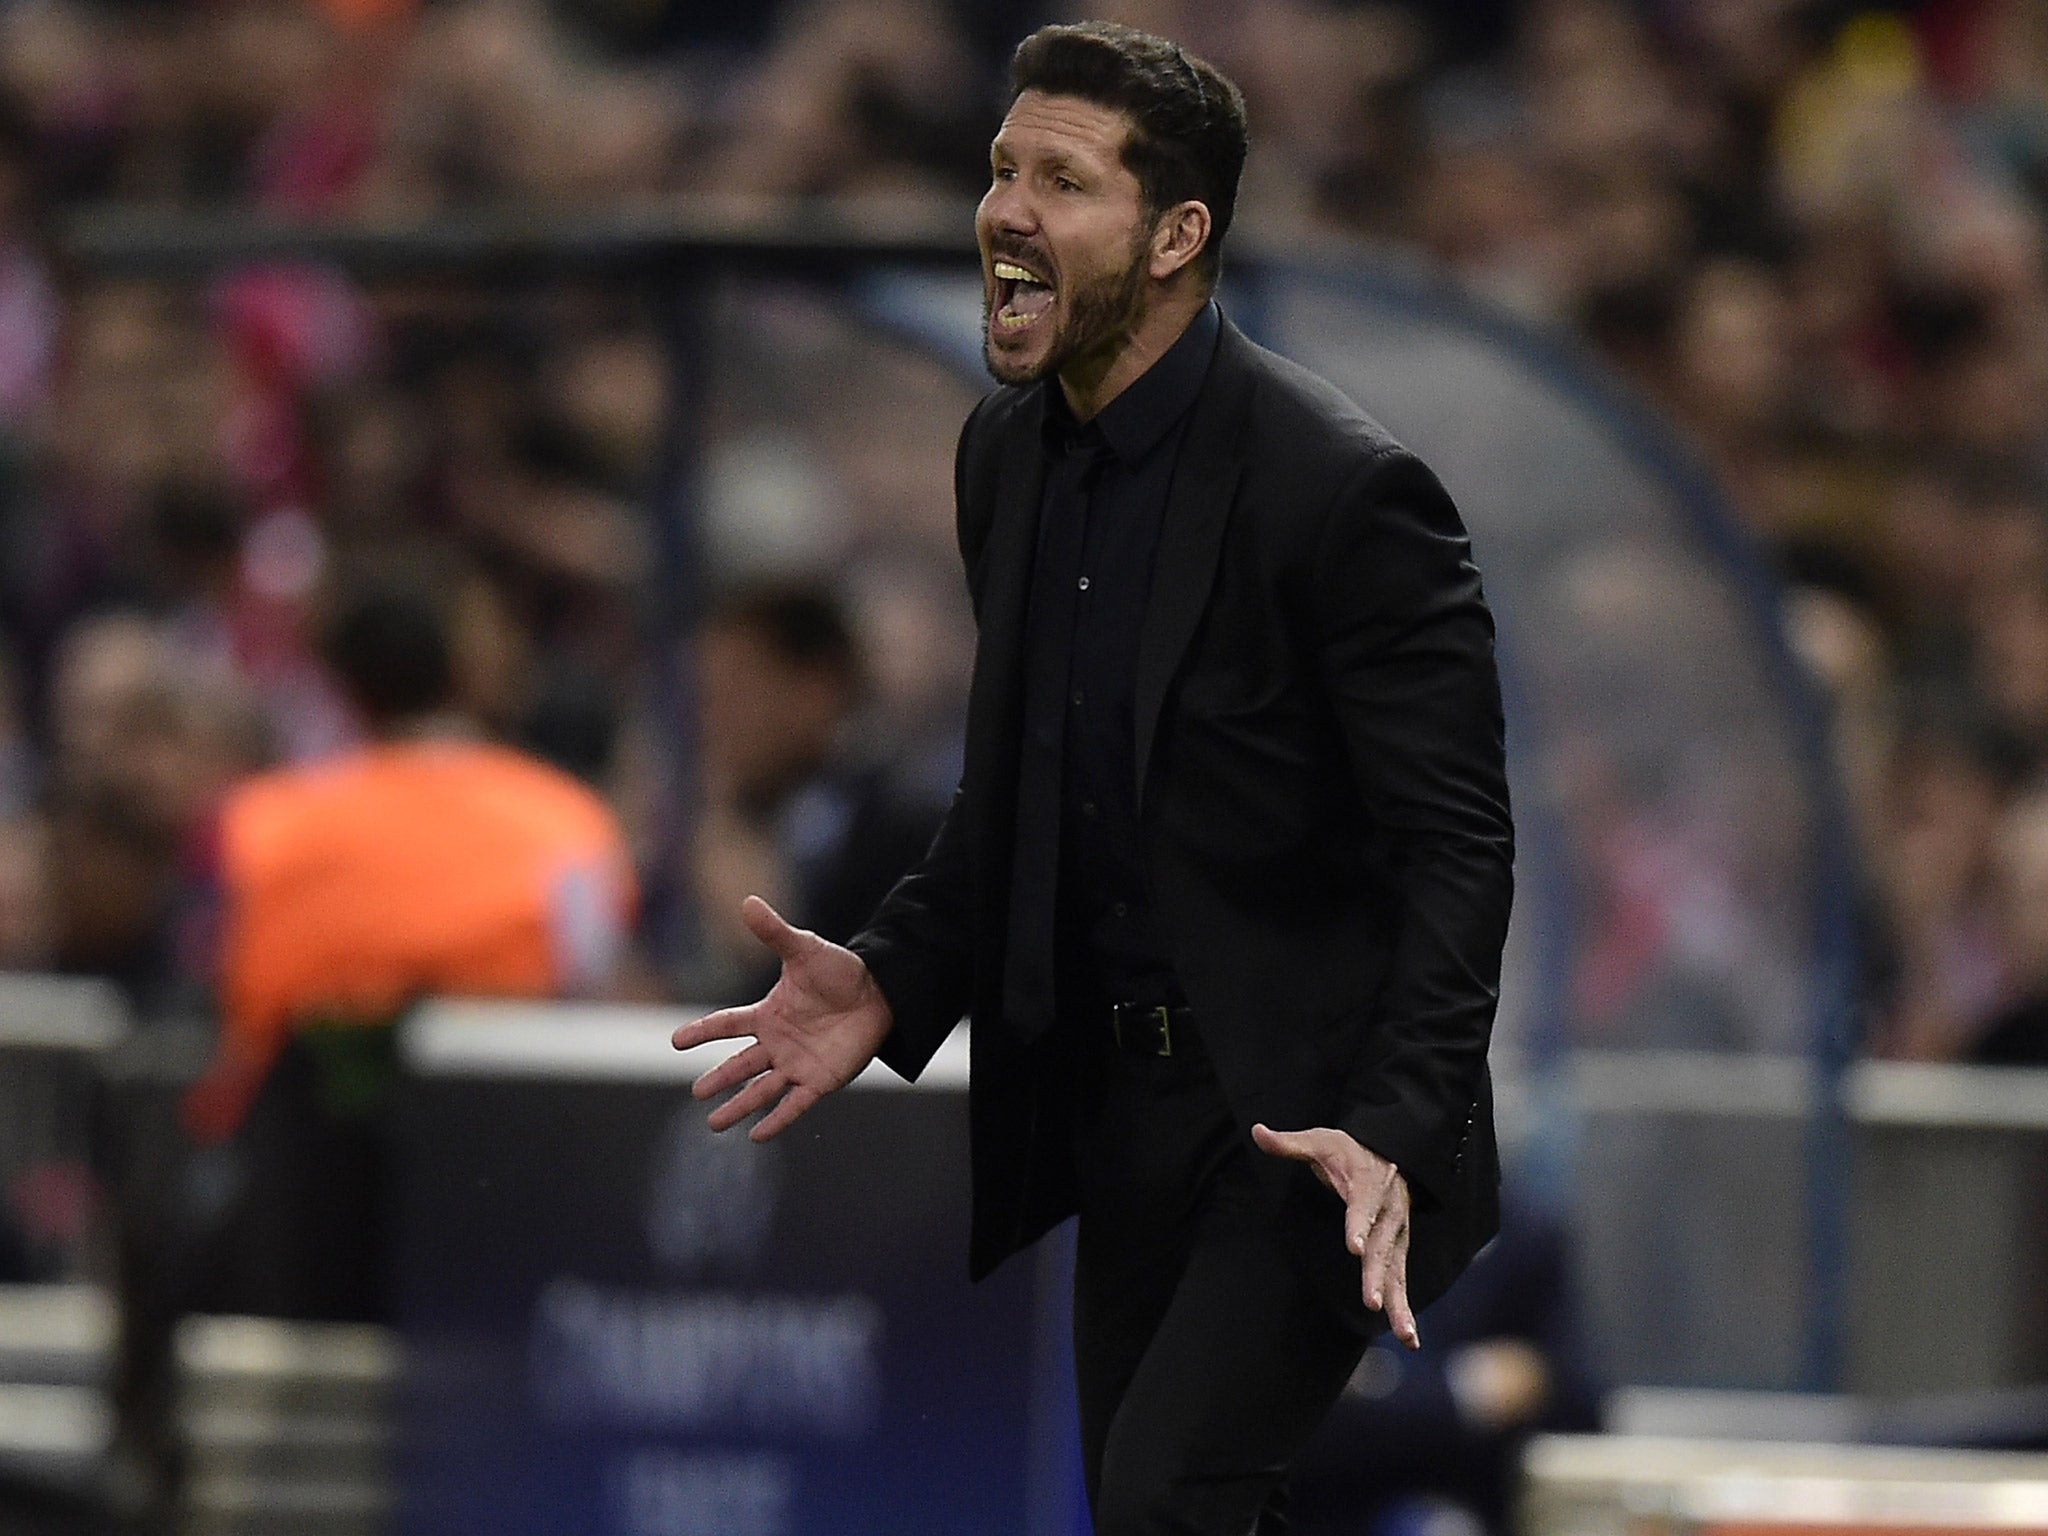 Diego Simeone is the 'obvious choice' to replace Arsene Wenger, says Ray Parlour